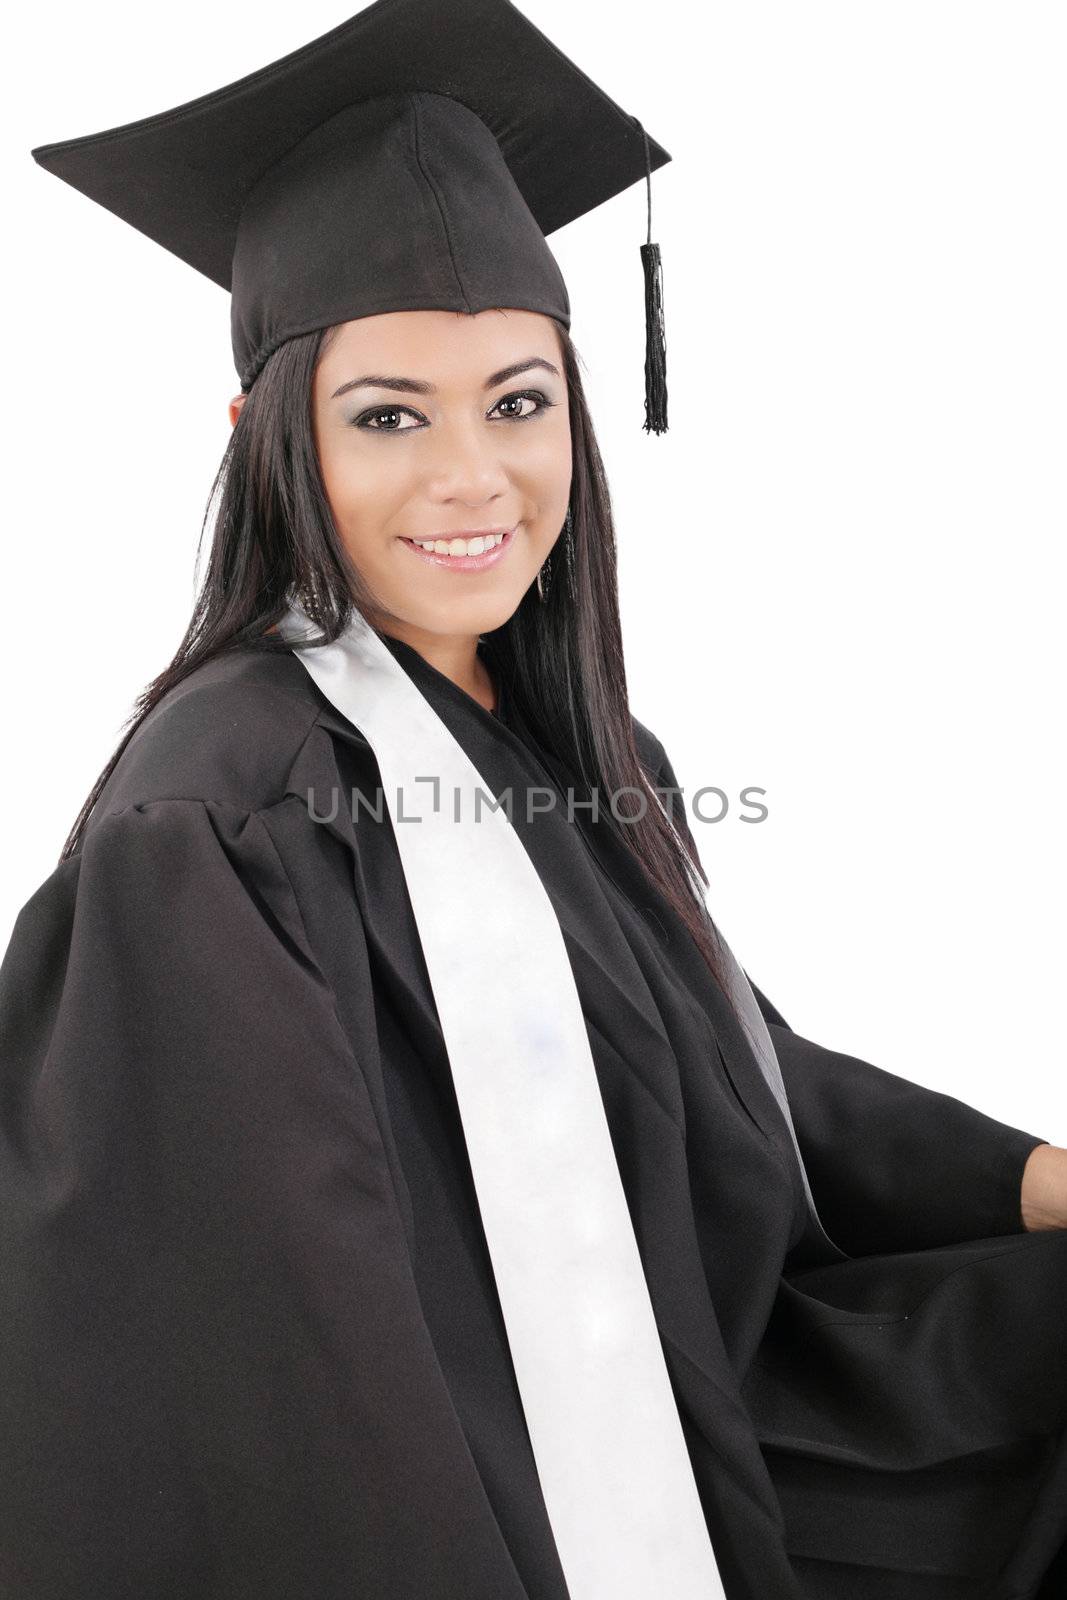 Female graduate wearing a gown and mortarboard - isolated over white